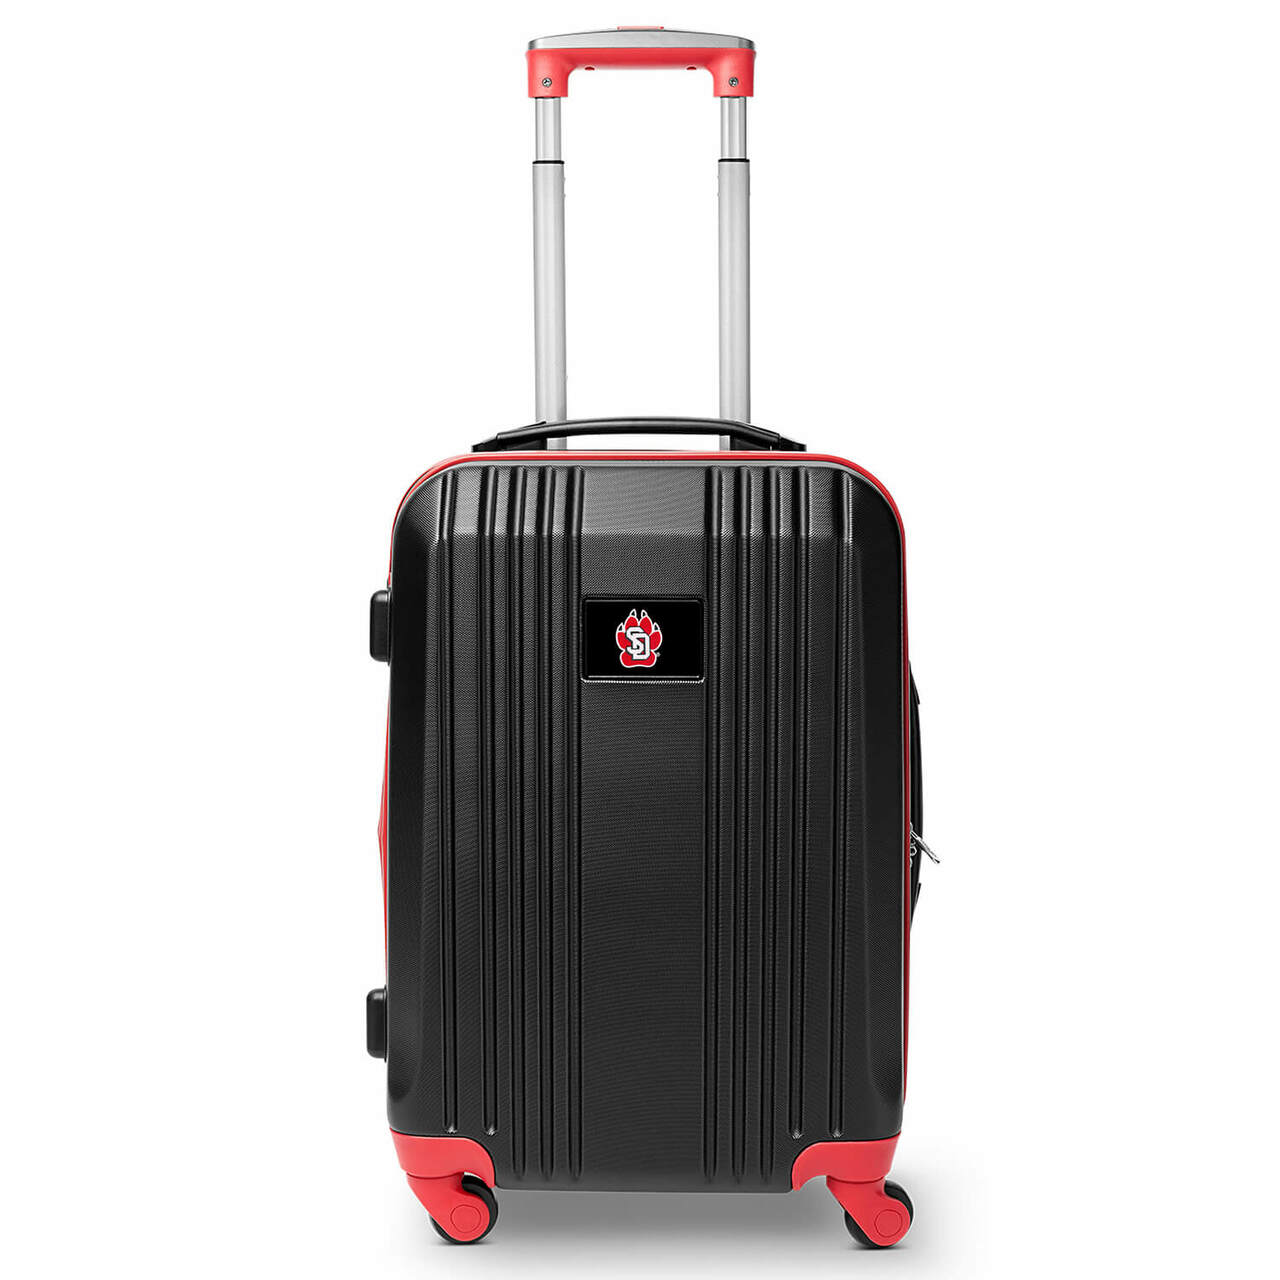 South Dakota Carry On Spinner Luggage | South Dakota Hardcase Two-Tone Luggage Carry-on Spinner in Red